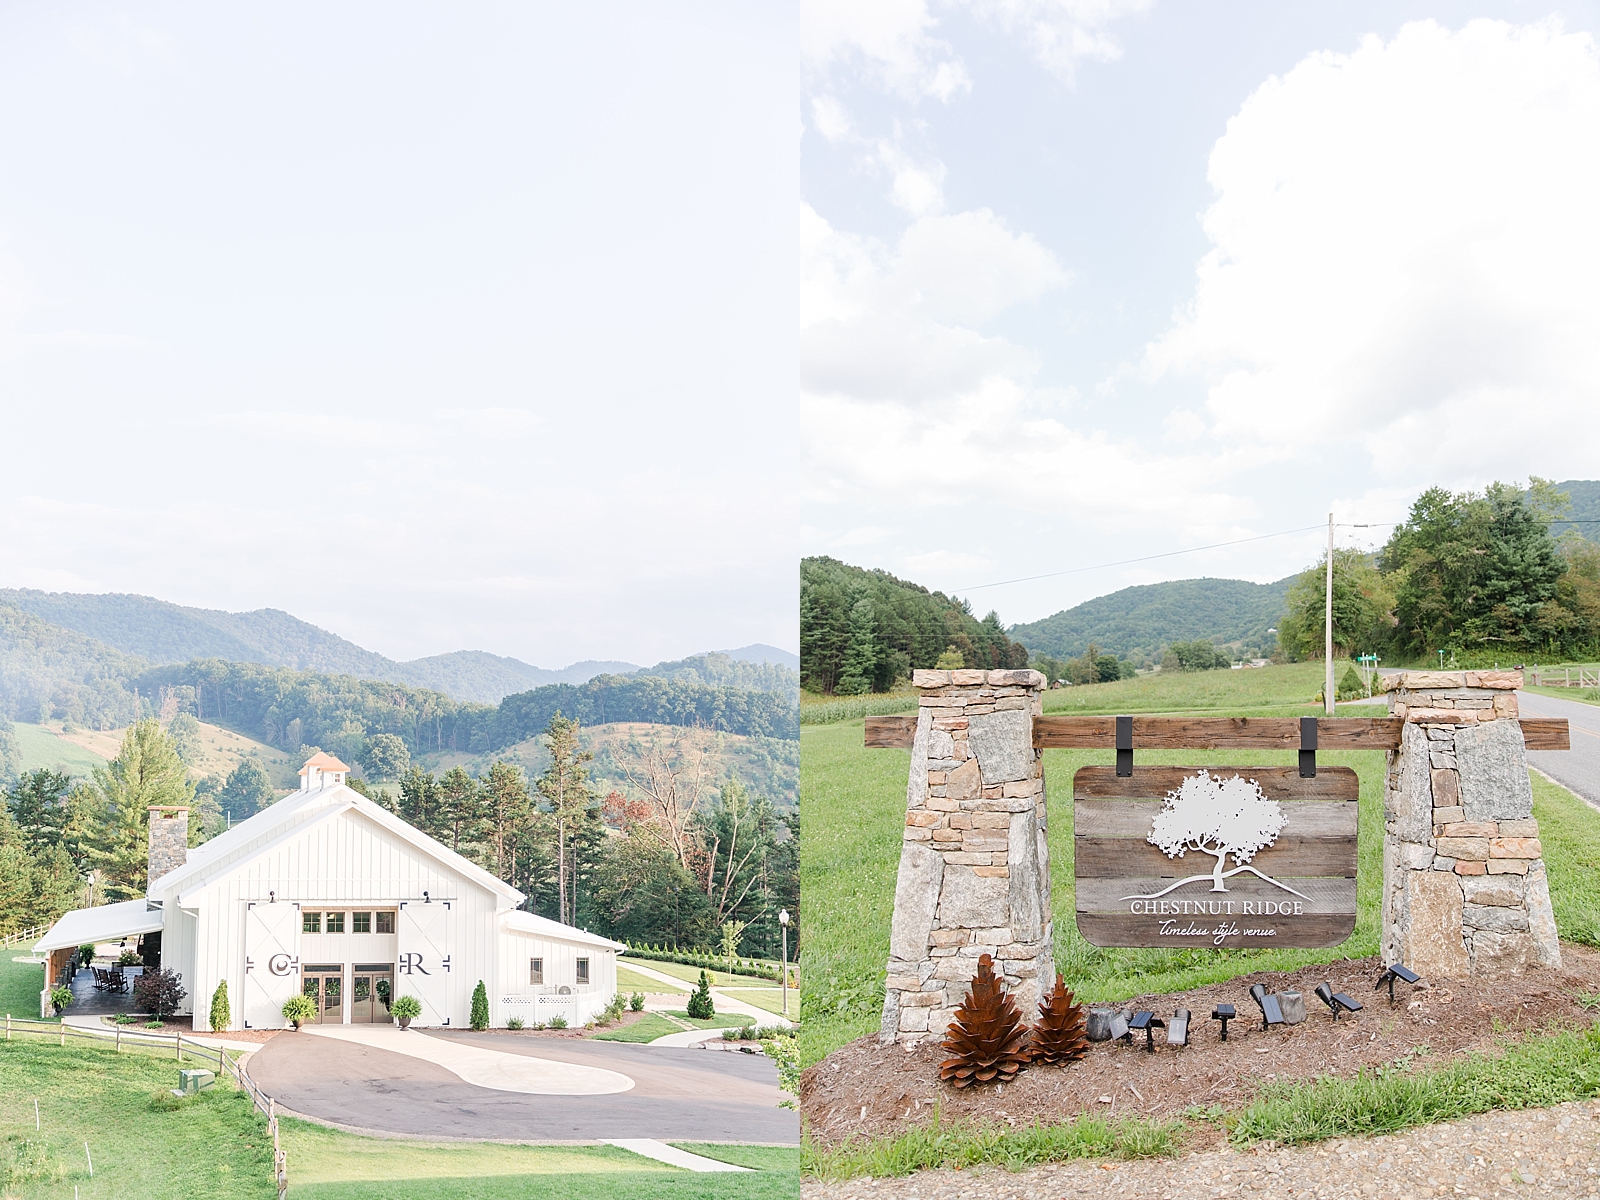 Chestnut Ridge Wedding white barn wedding venue with mountain background and wood venue sign Photos